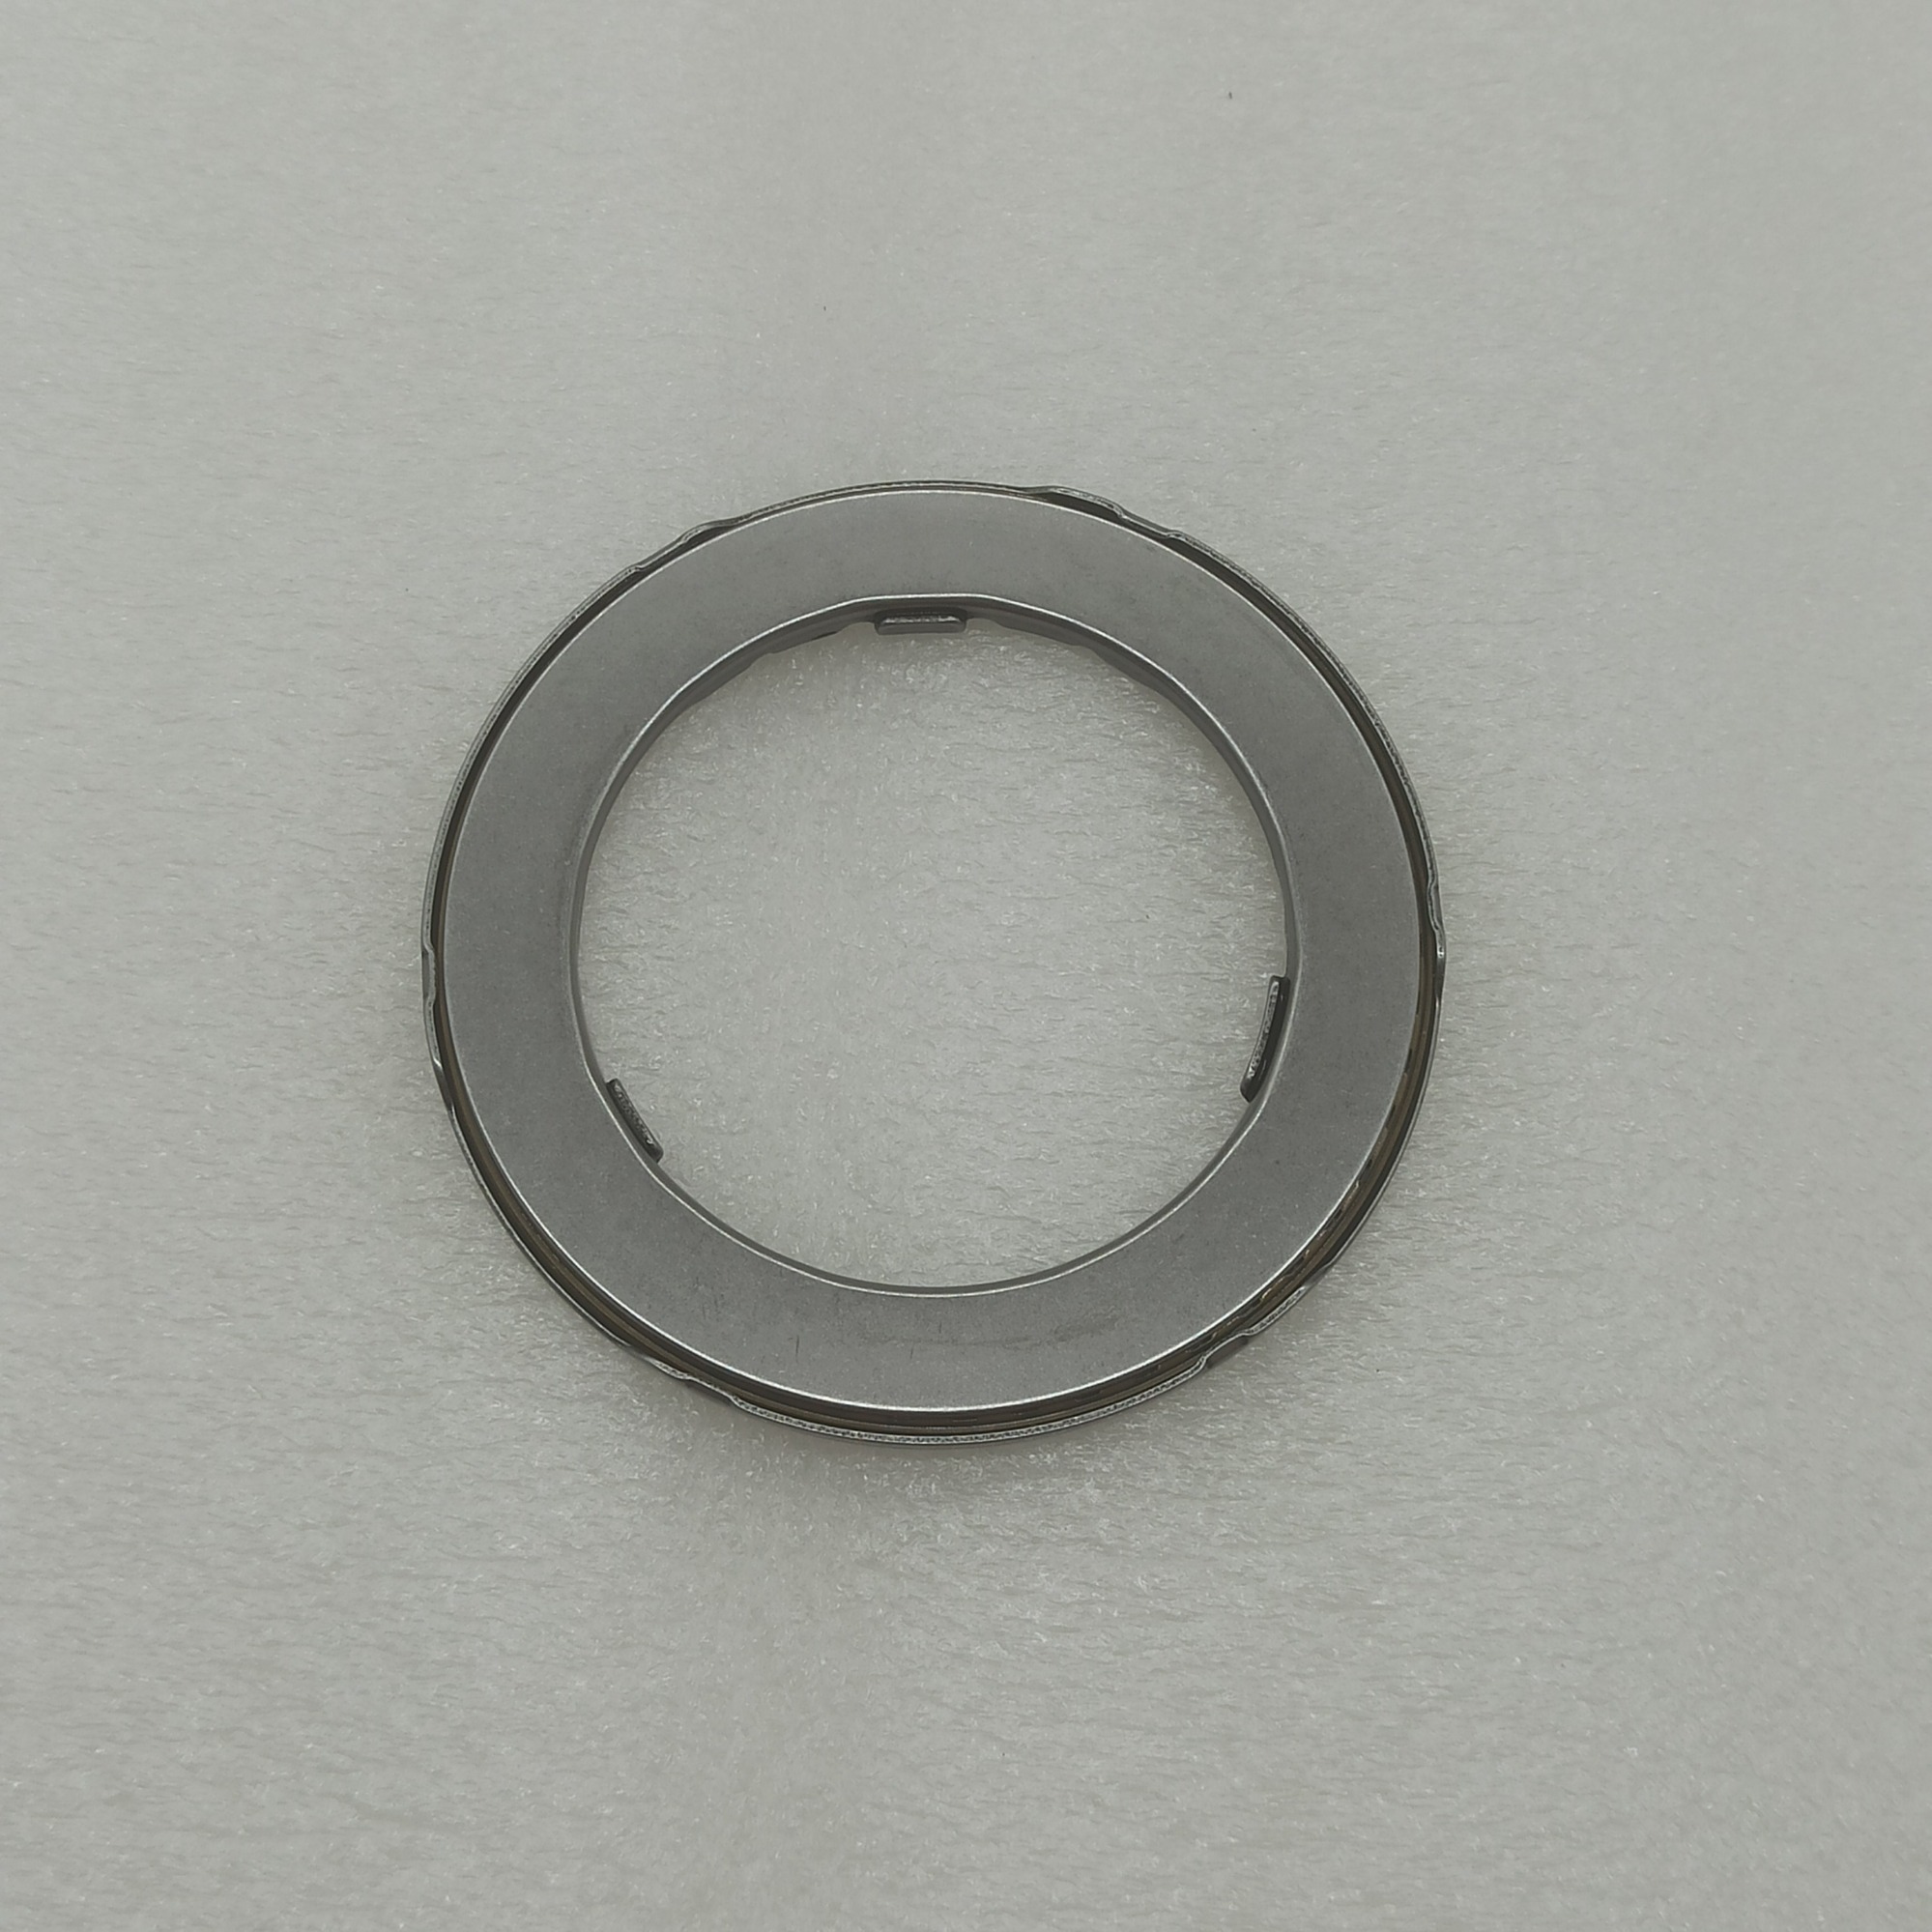 AATP-0087-AM AATP bearing PS9051, AL4 converter aftermarket good quality transfer case parts for repair or replace or test